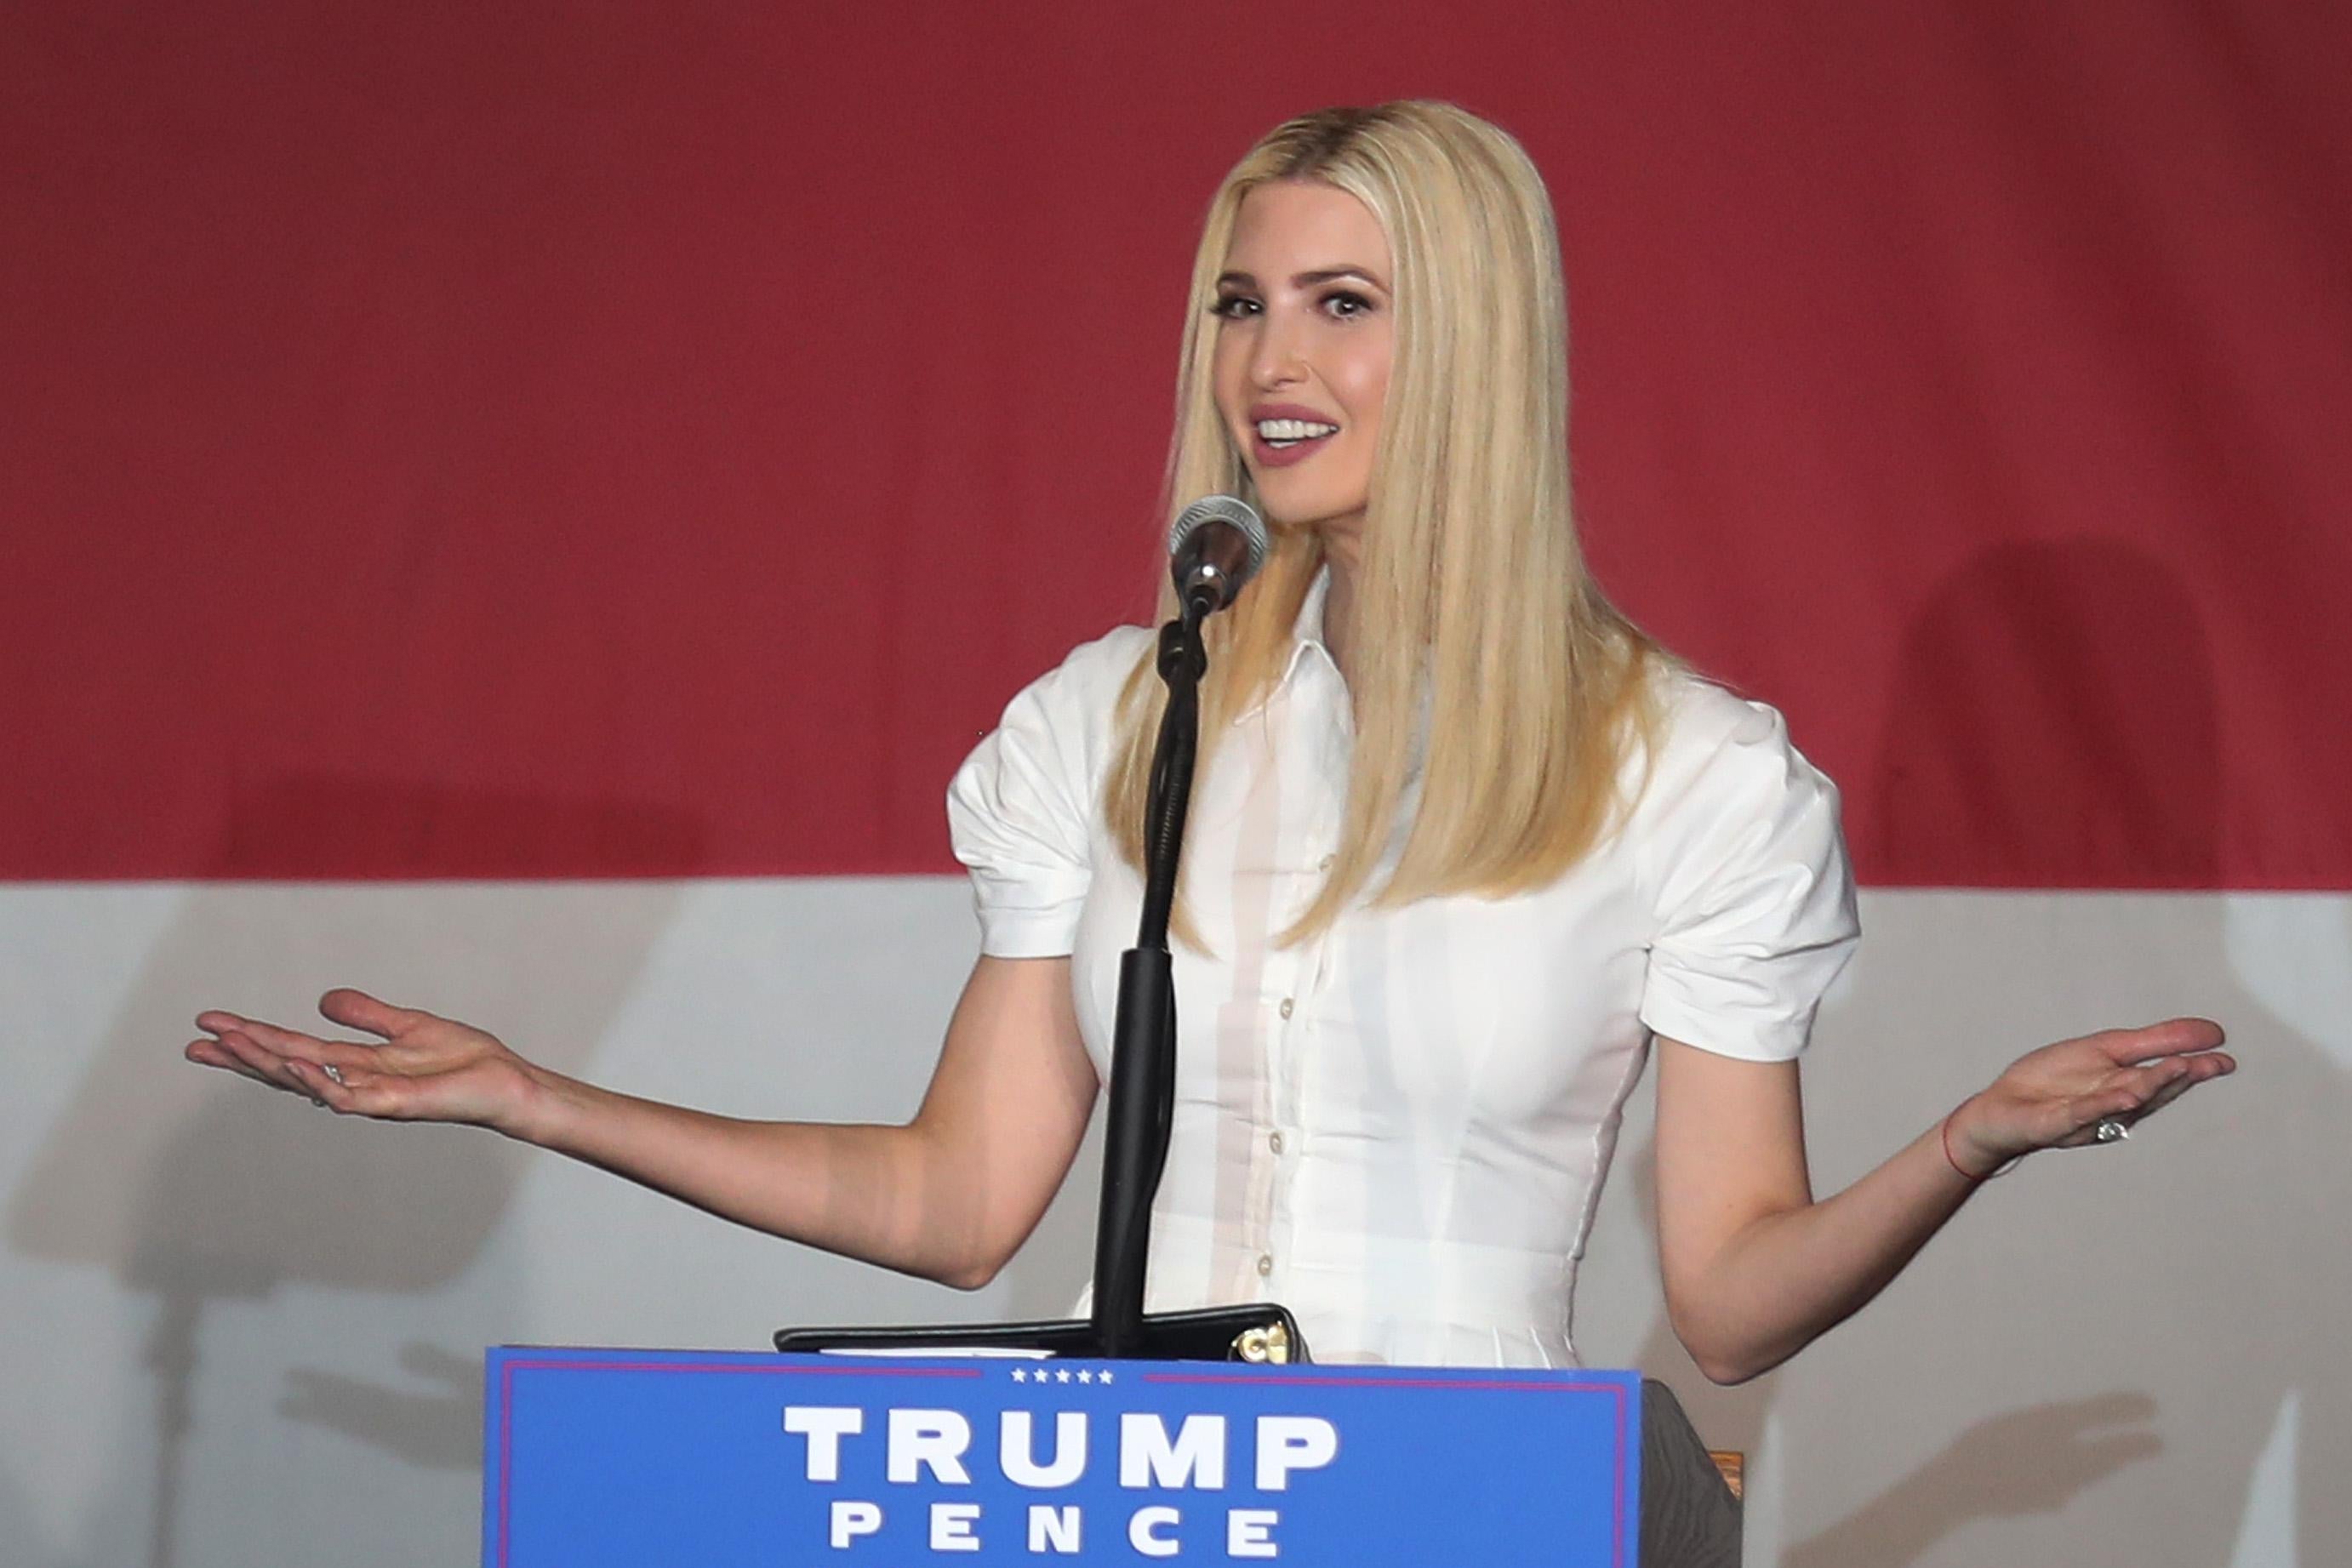 Ivanka Trump, wearing white, gestures with her arms as she speaks at a podium onstage